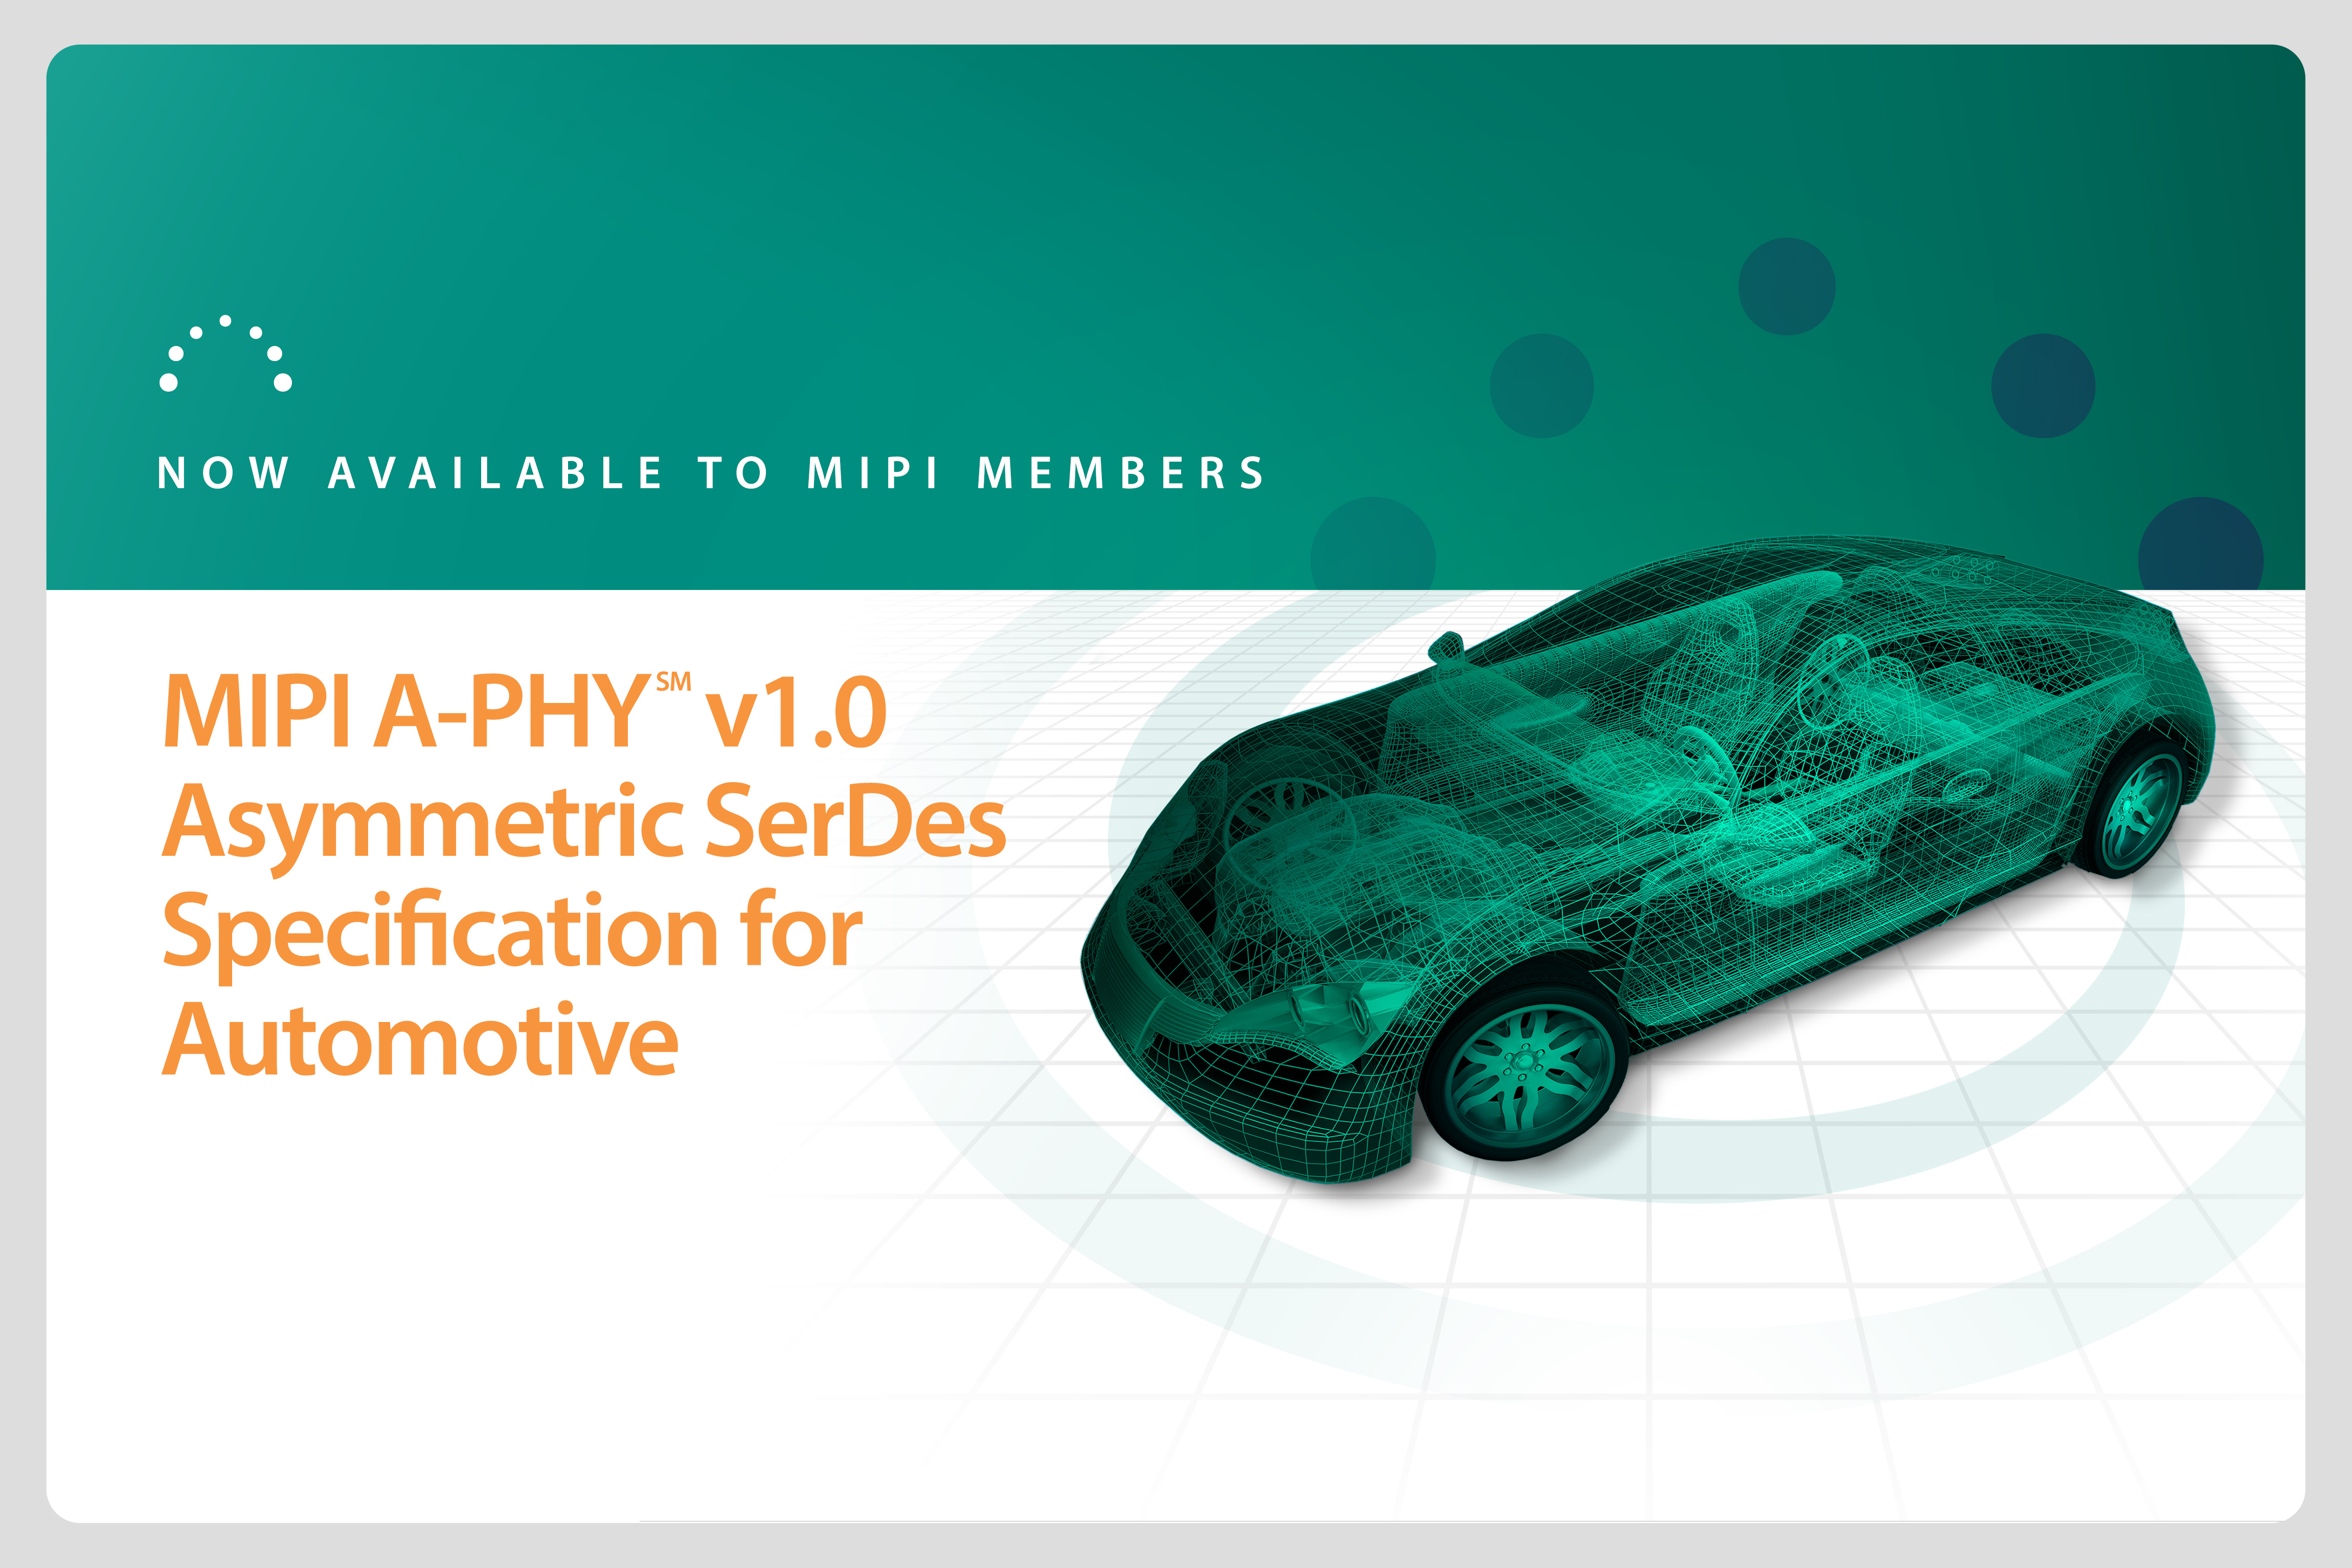 MIPI A-PHY now available to members